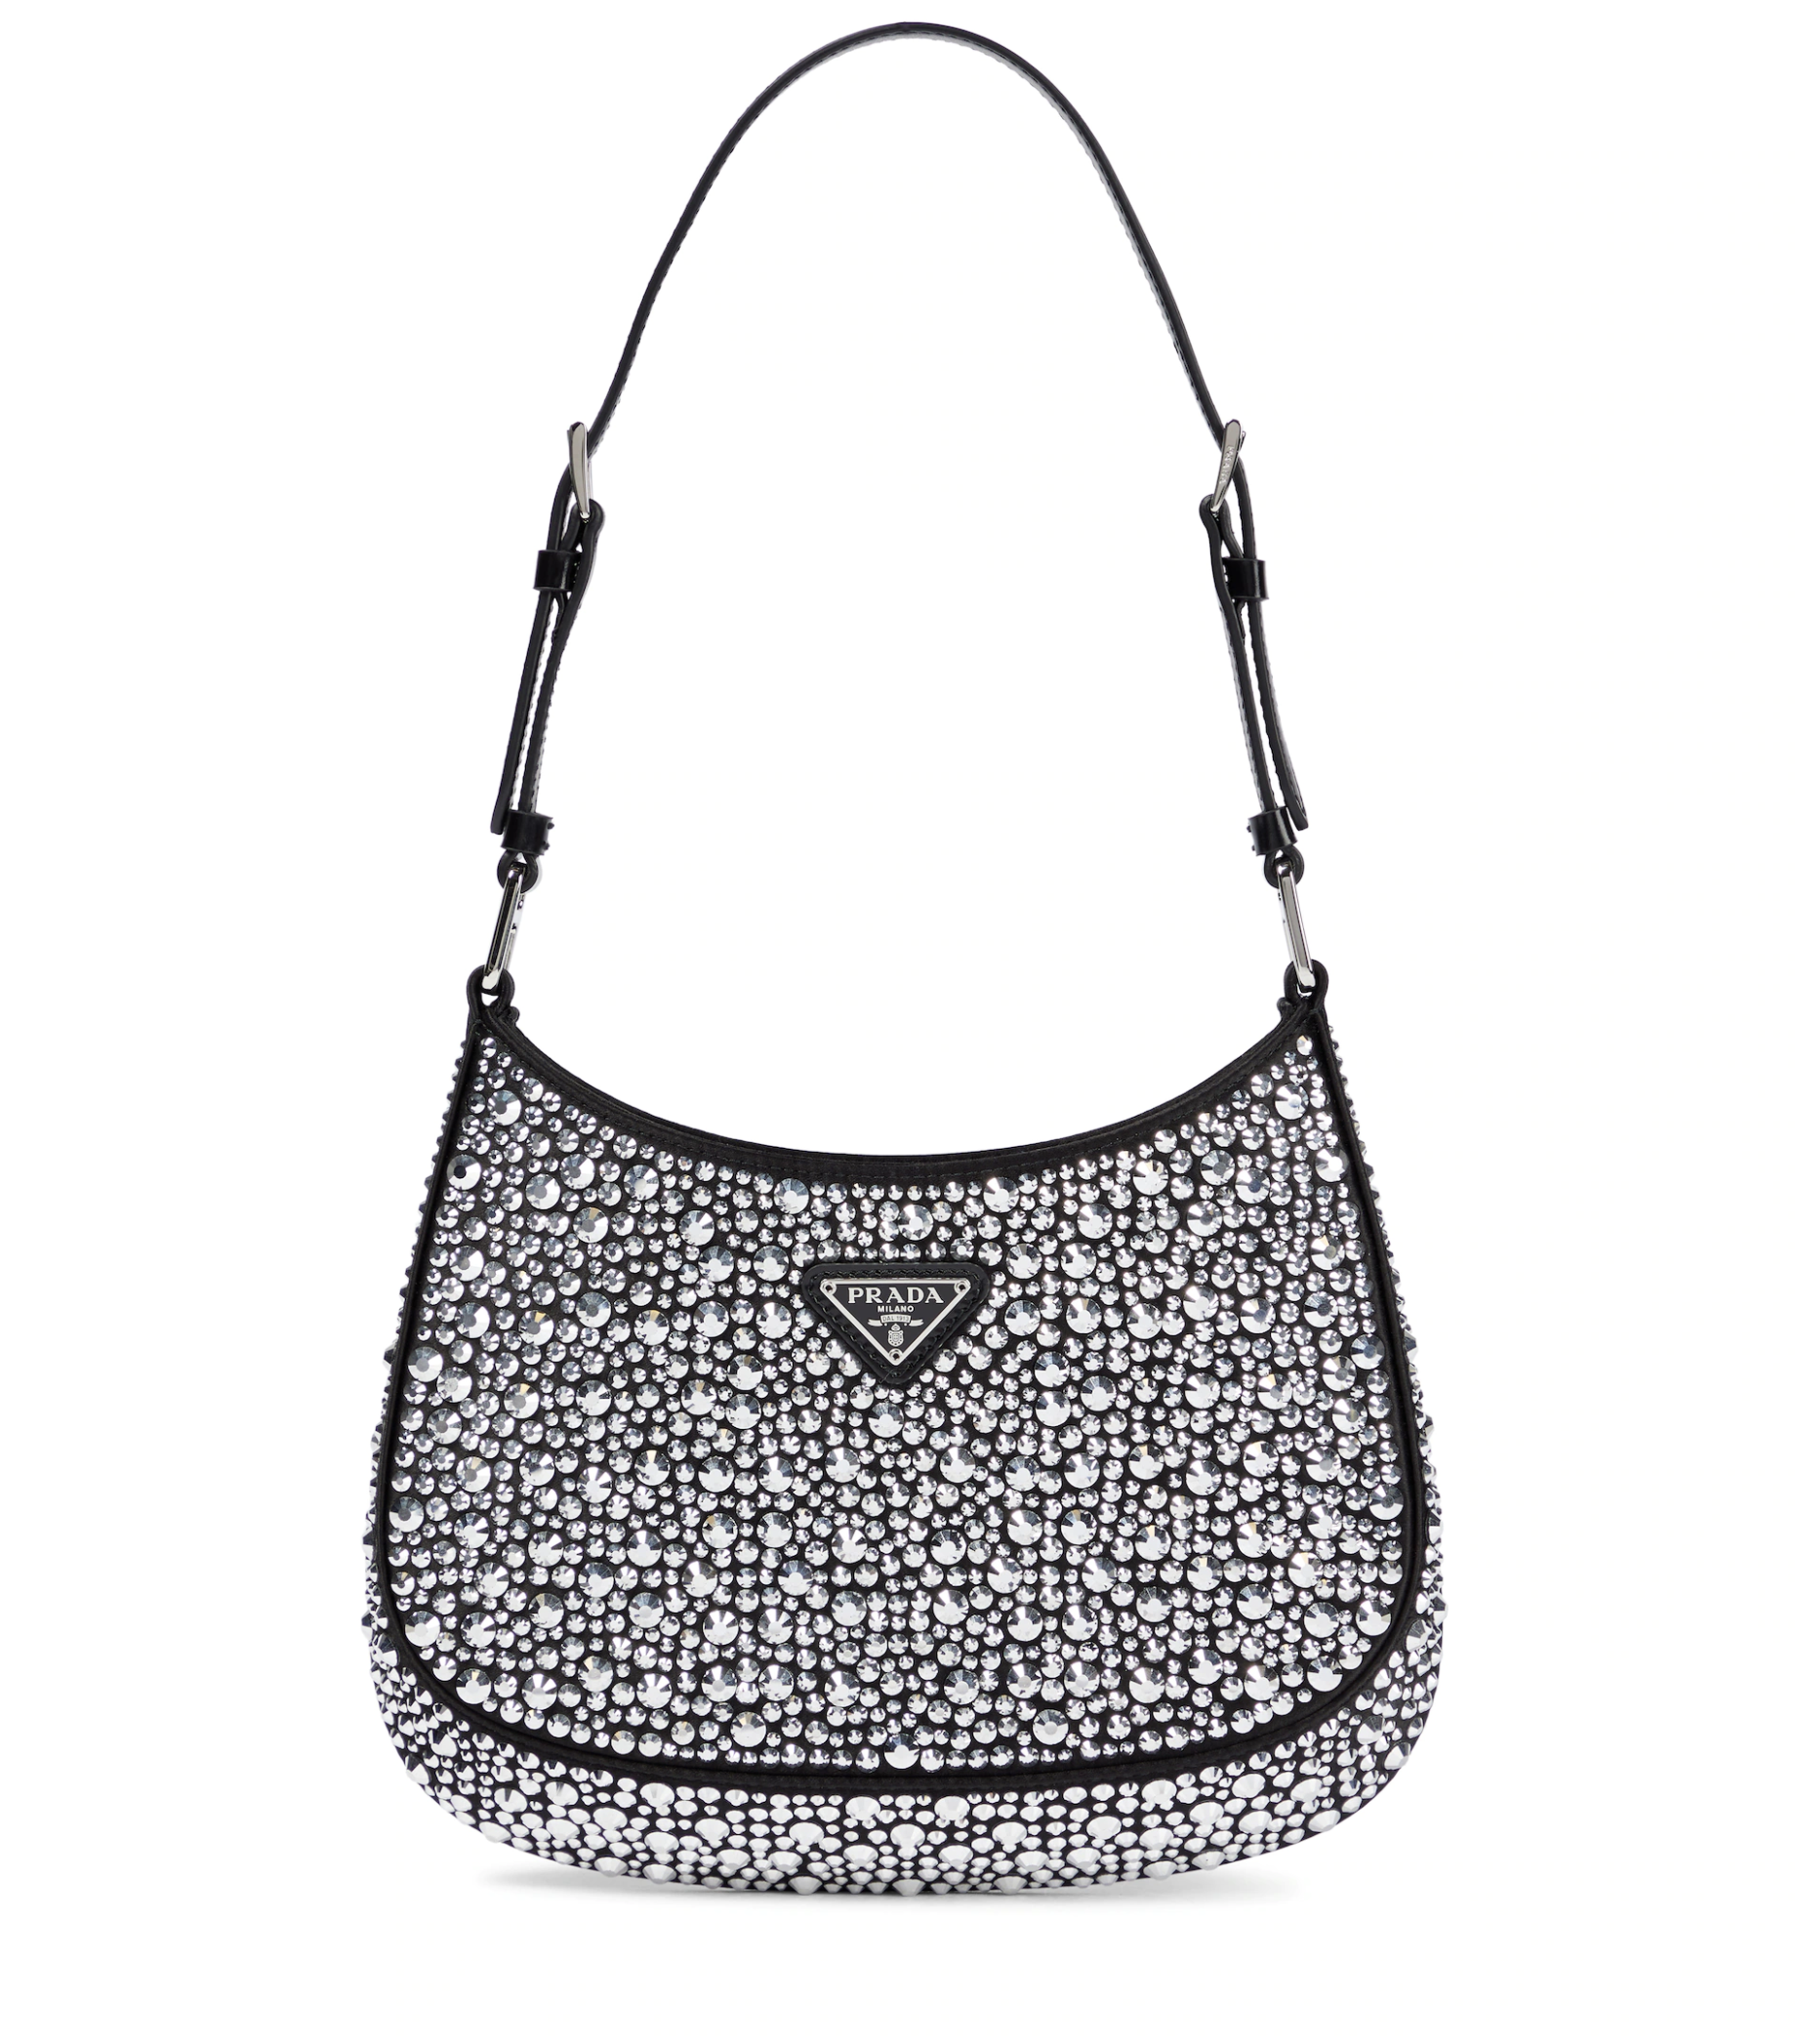 sparkle-in-style-this-new-years-eve-cleo-prada-bag